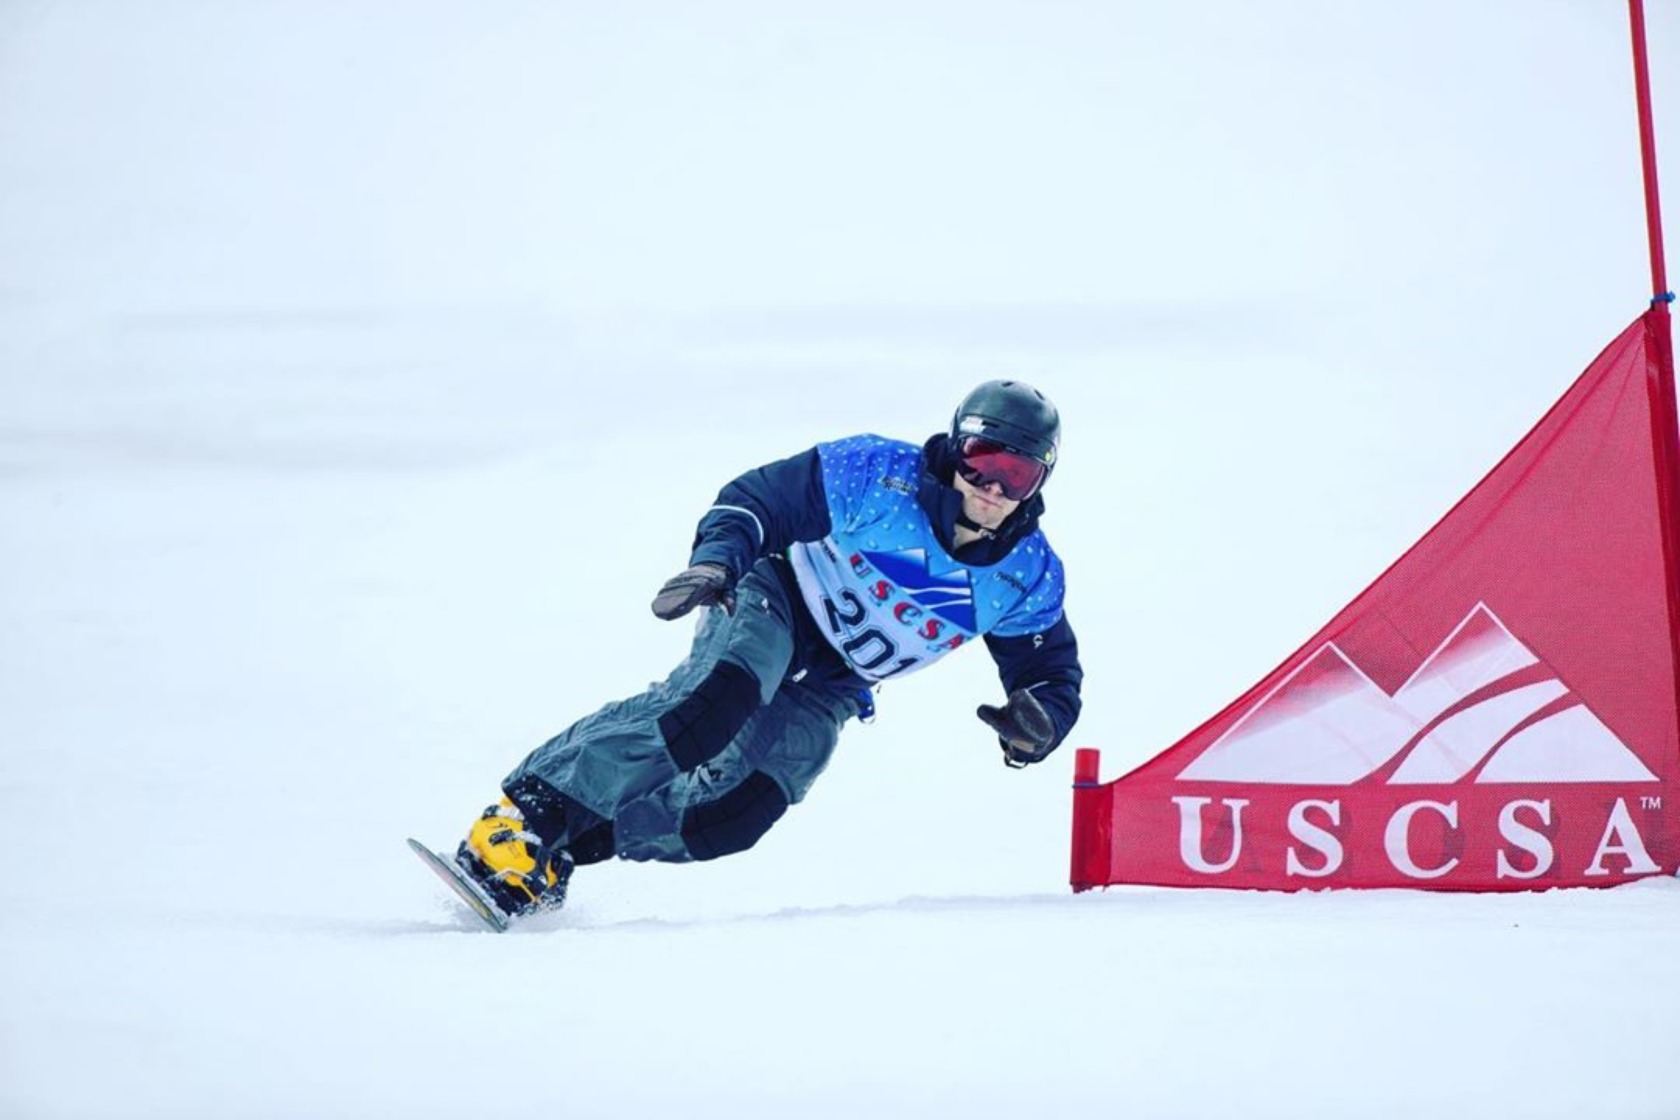 Myles Silverman racing at a USCSA event in his Arctica All Mountain Pants and Viper Jacket